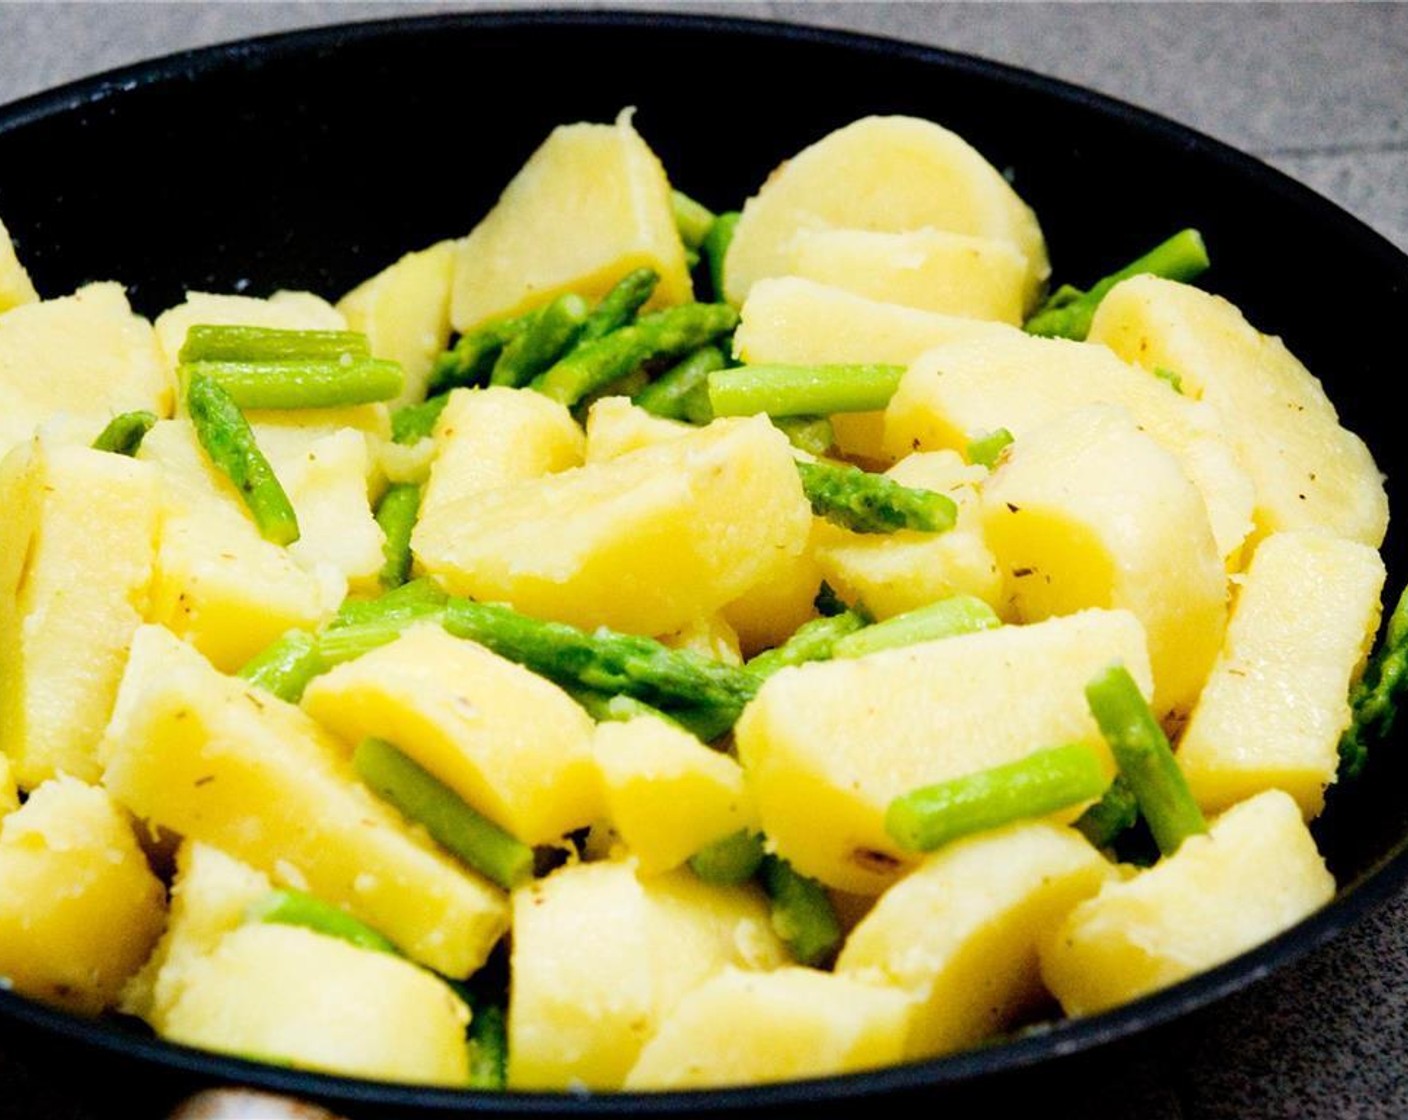 step 2 Heat the Unsalted Butter (1 Tbsp) in a large pan over medium heat, and add the potatoes and asparagus. Cook for 10 minutes.